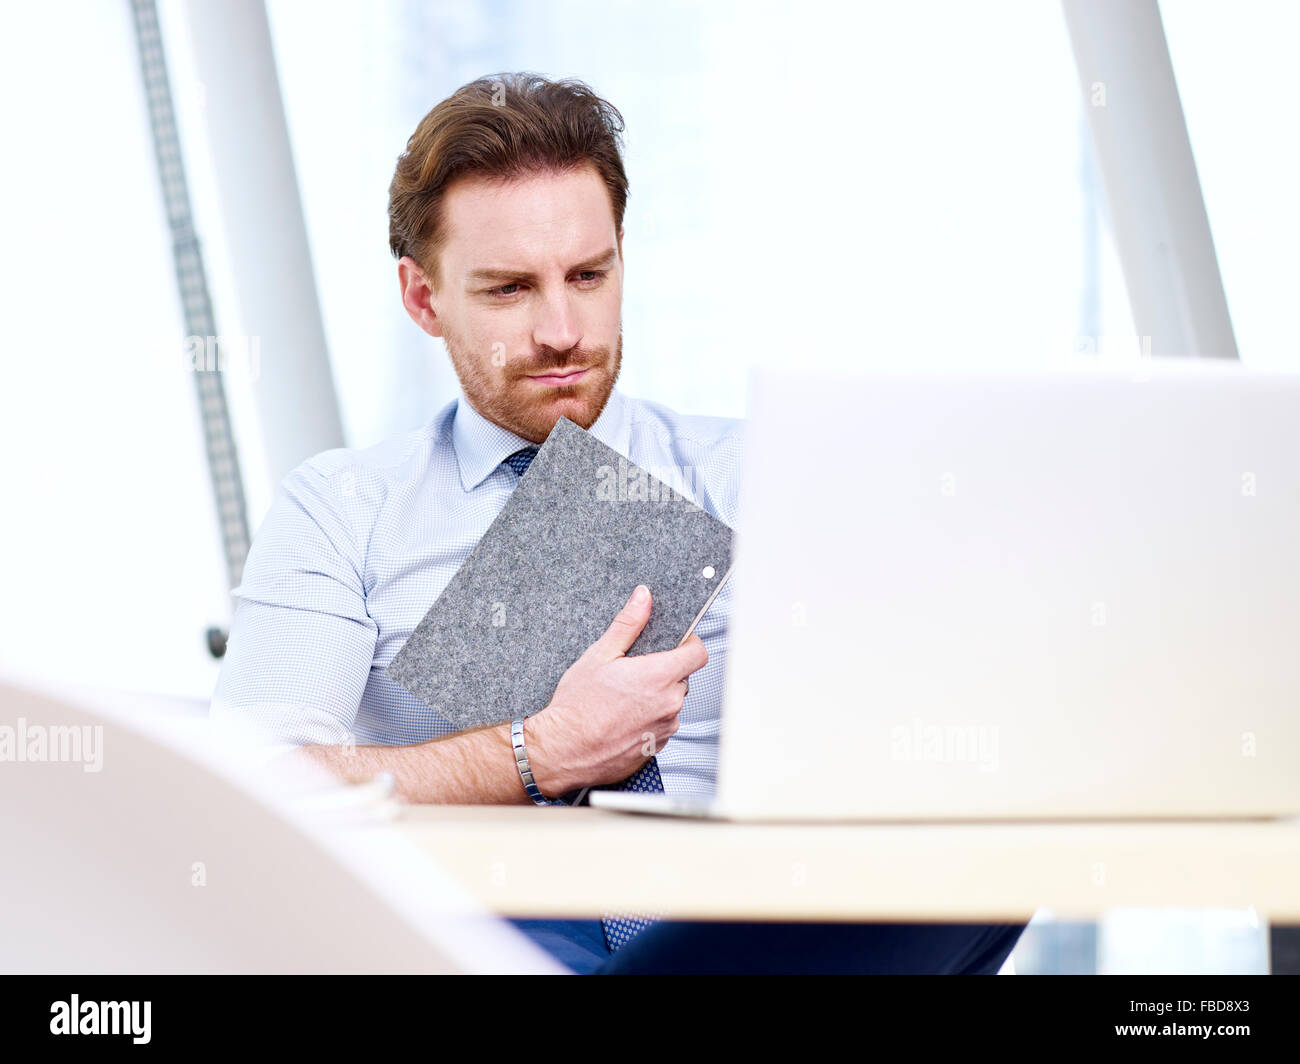 business person working in office Stock Photo